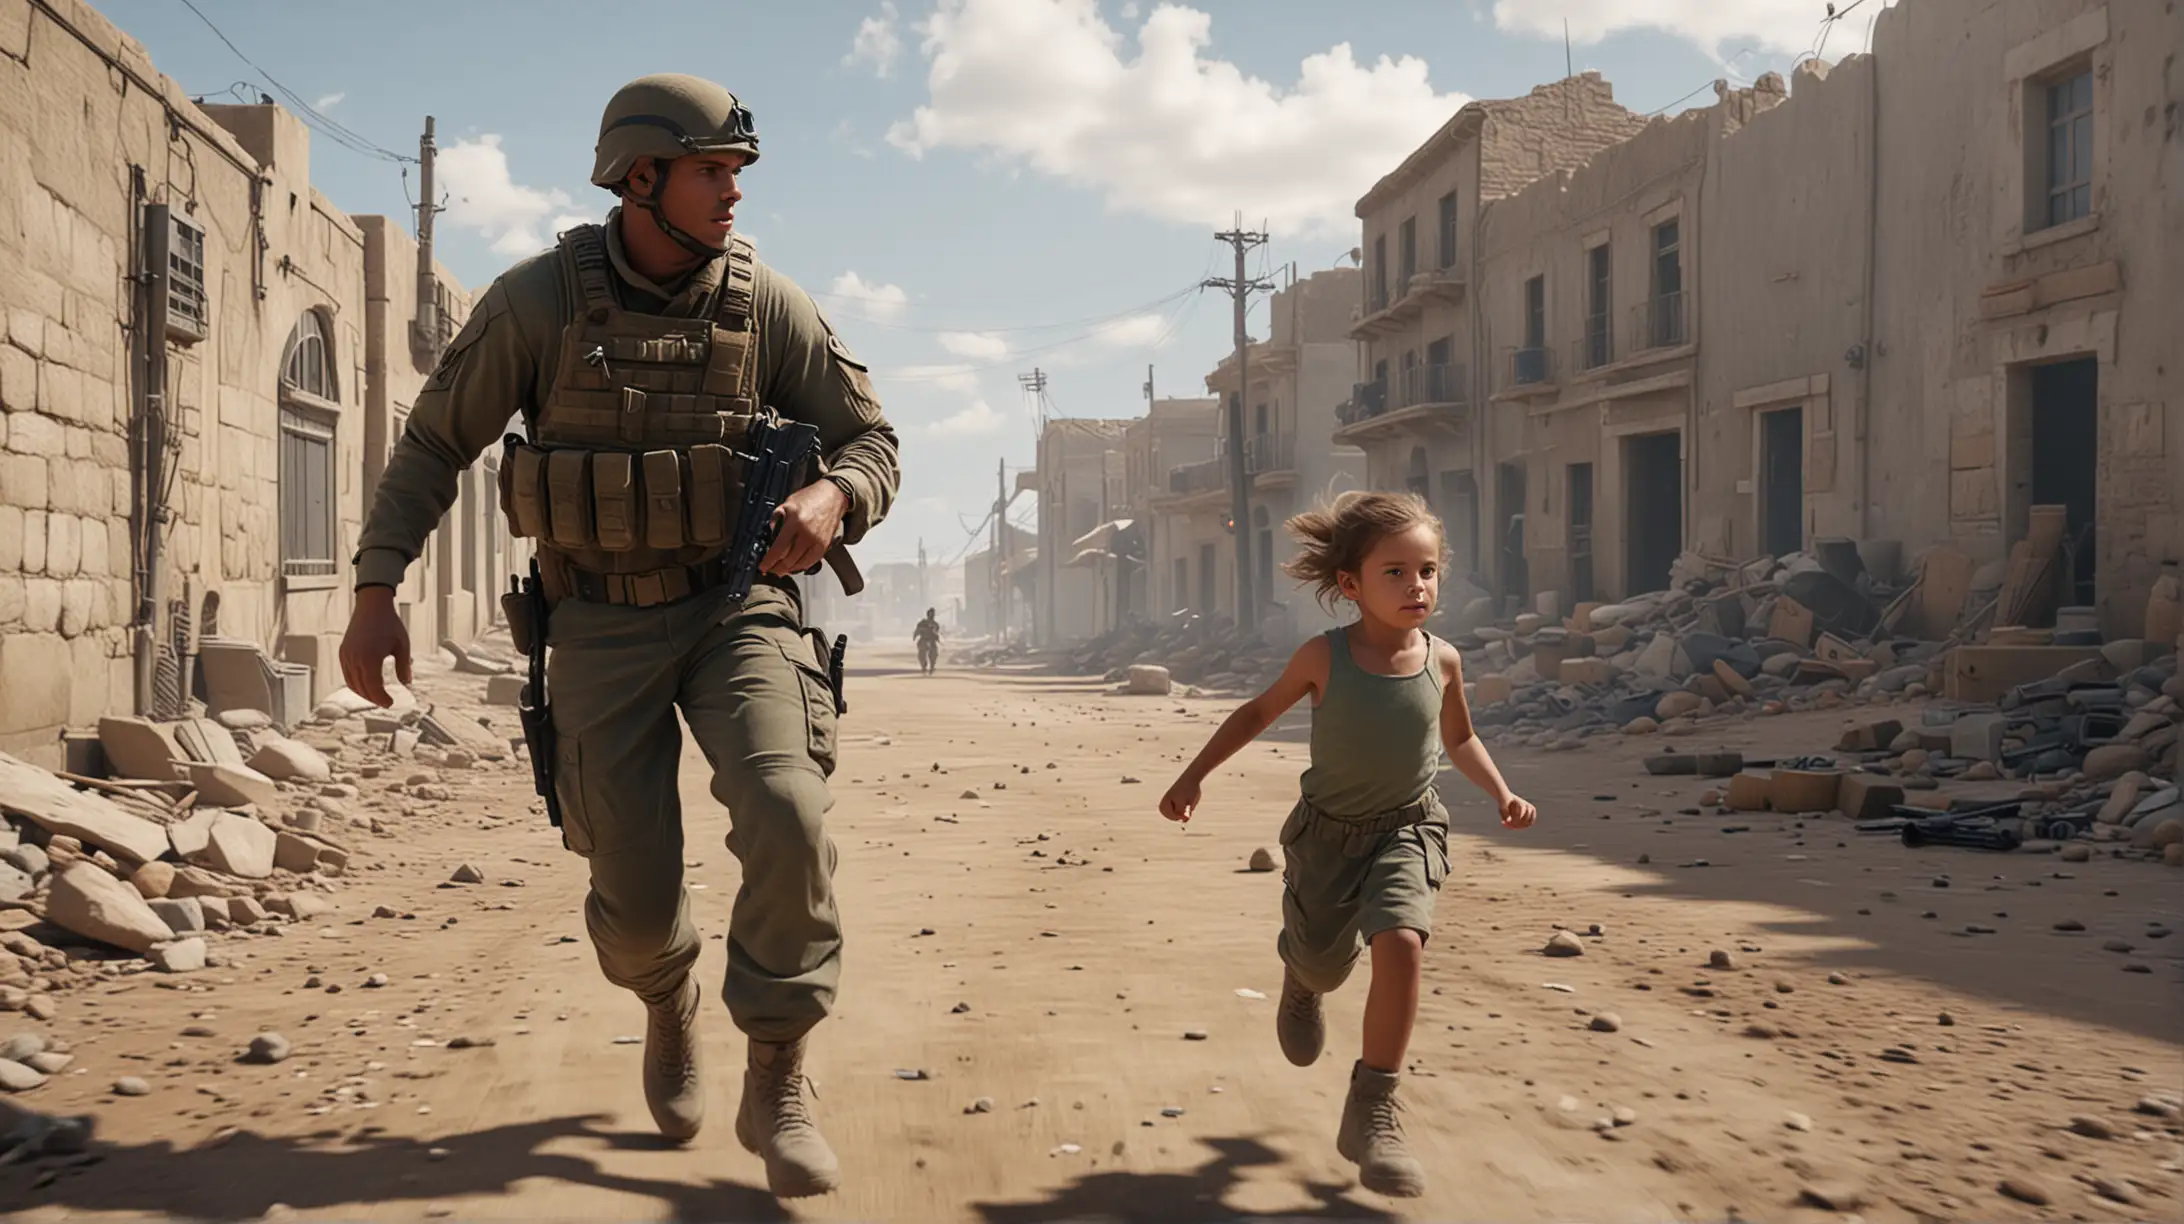 Generate a 4K hyperrealistic image of a soldier in a first person pov,  running with a little girl in his hand whilst being shot at.